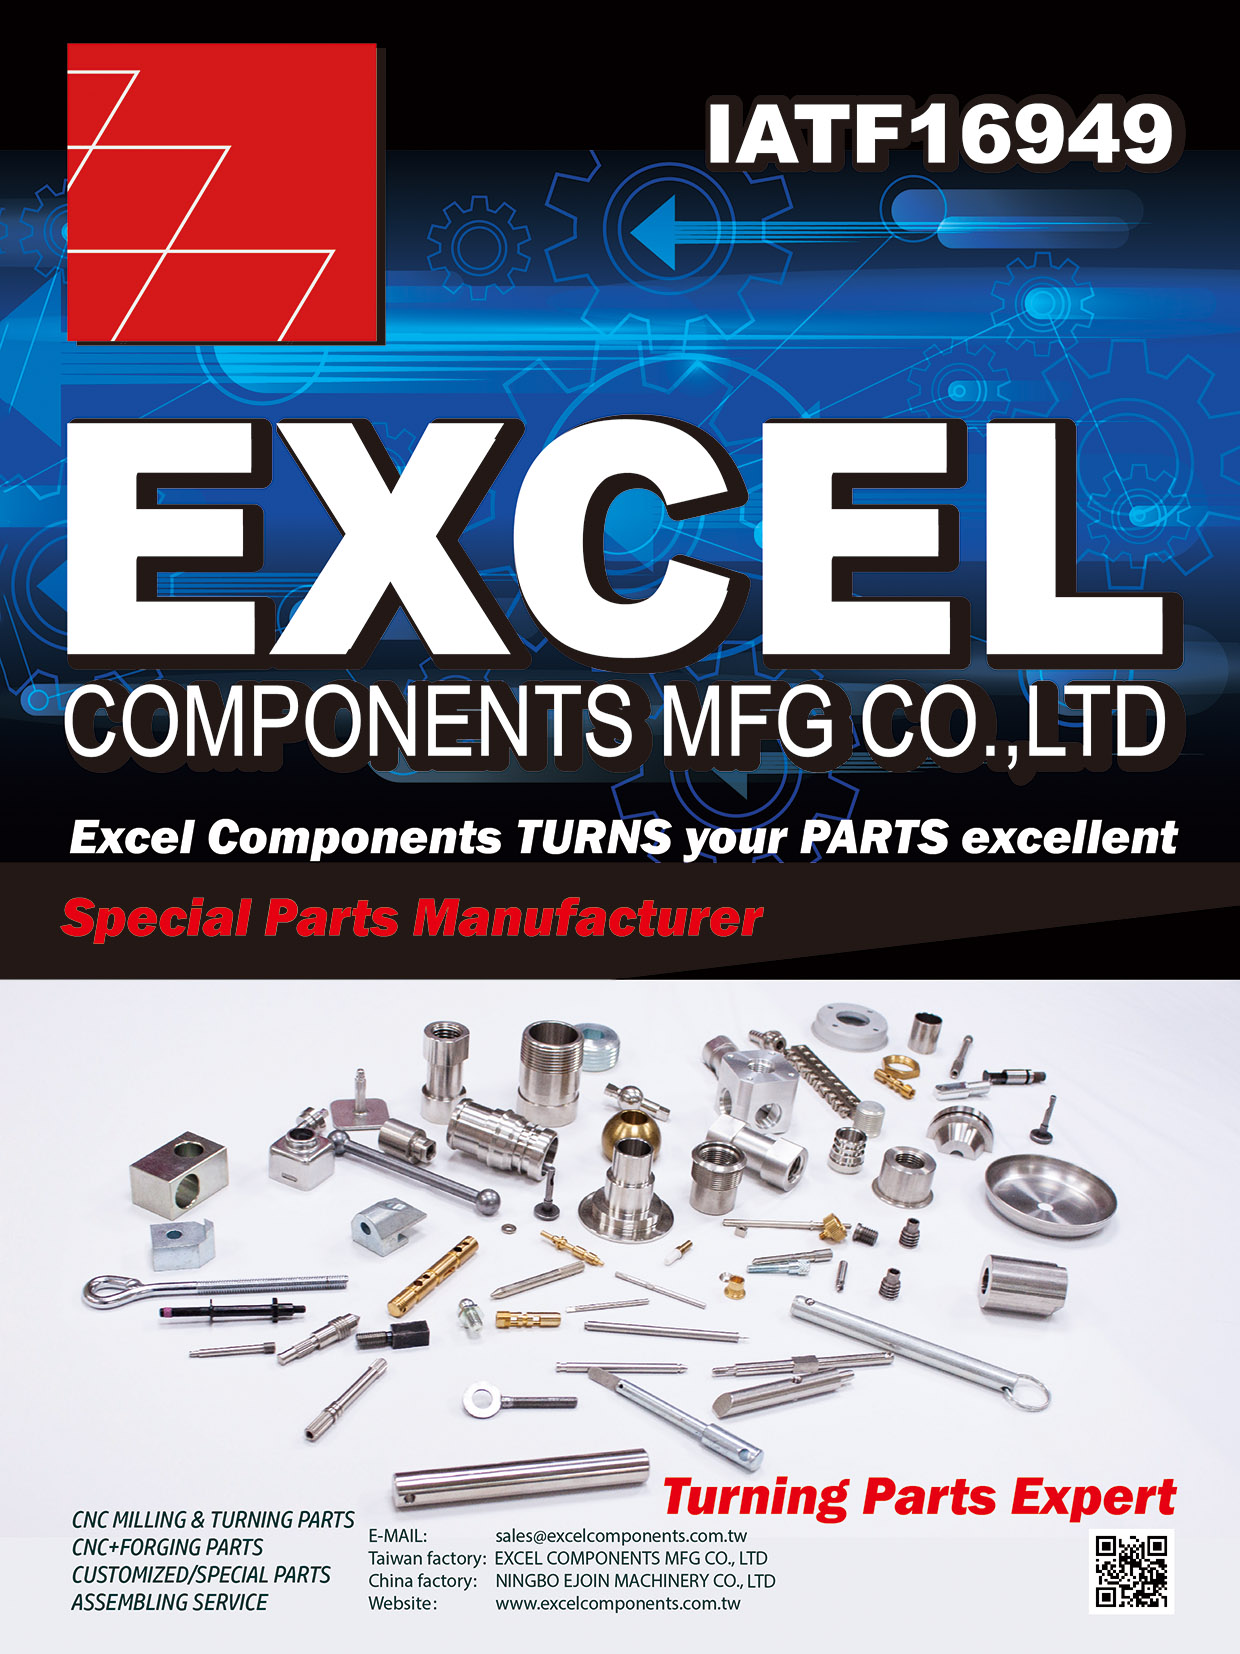 EXCEL COMPONENTS MFG. CO., LTD. , Special Parts, CNC Milling & Turning Parts, CNC+Forging Parts, Customized/Special Parts, Assembling Service